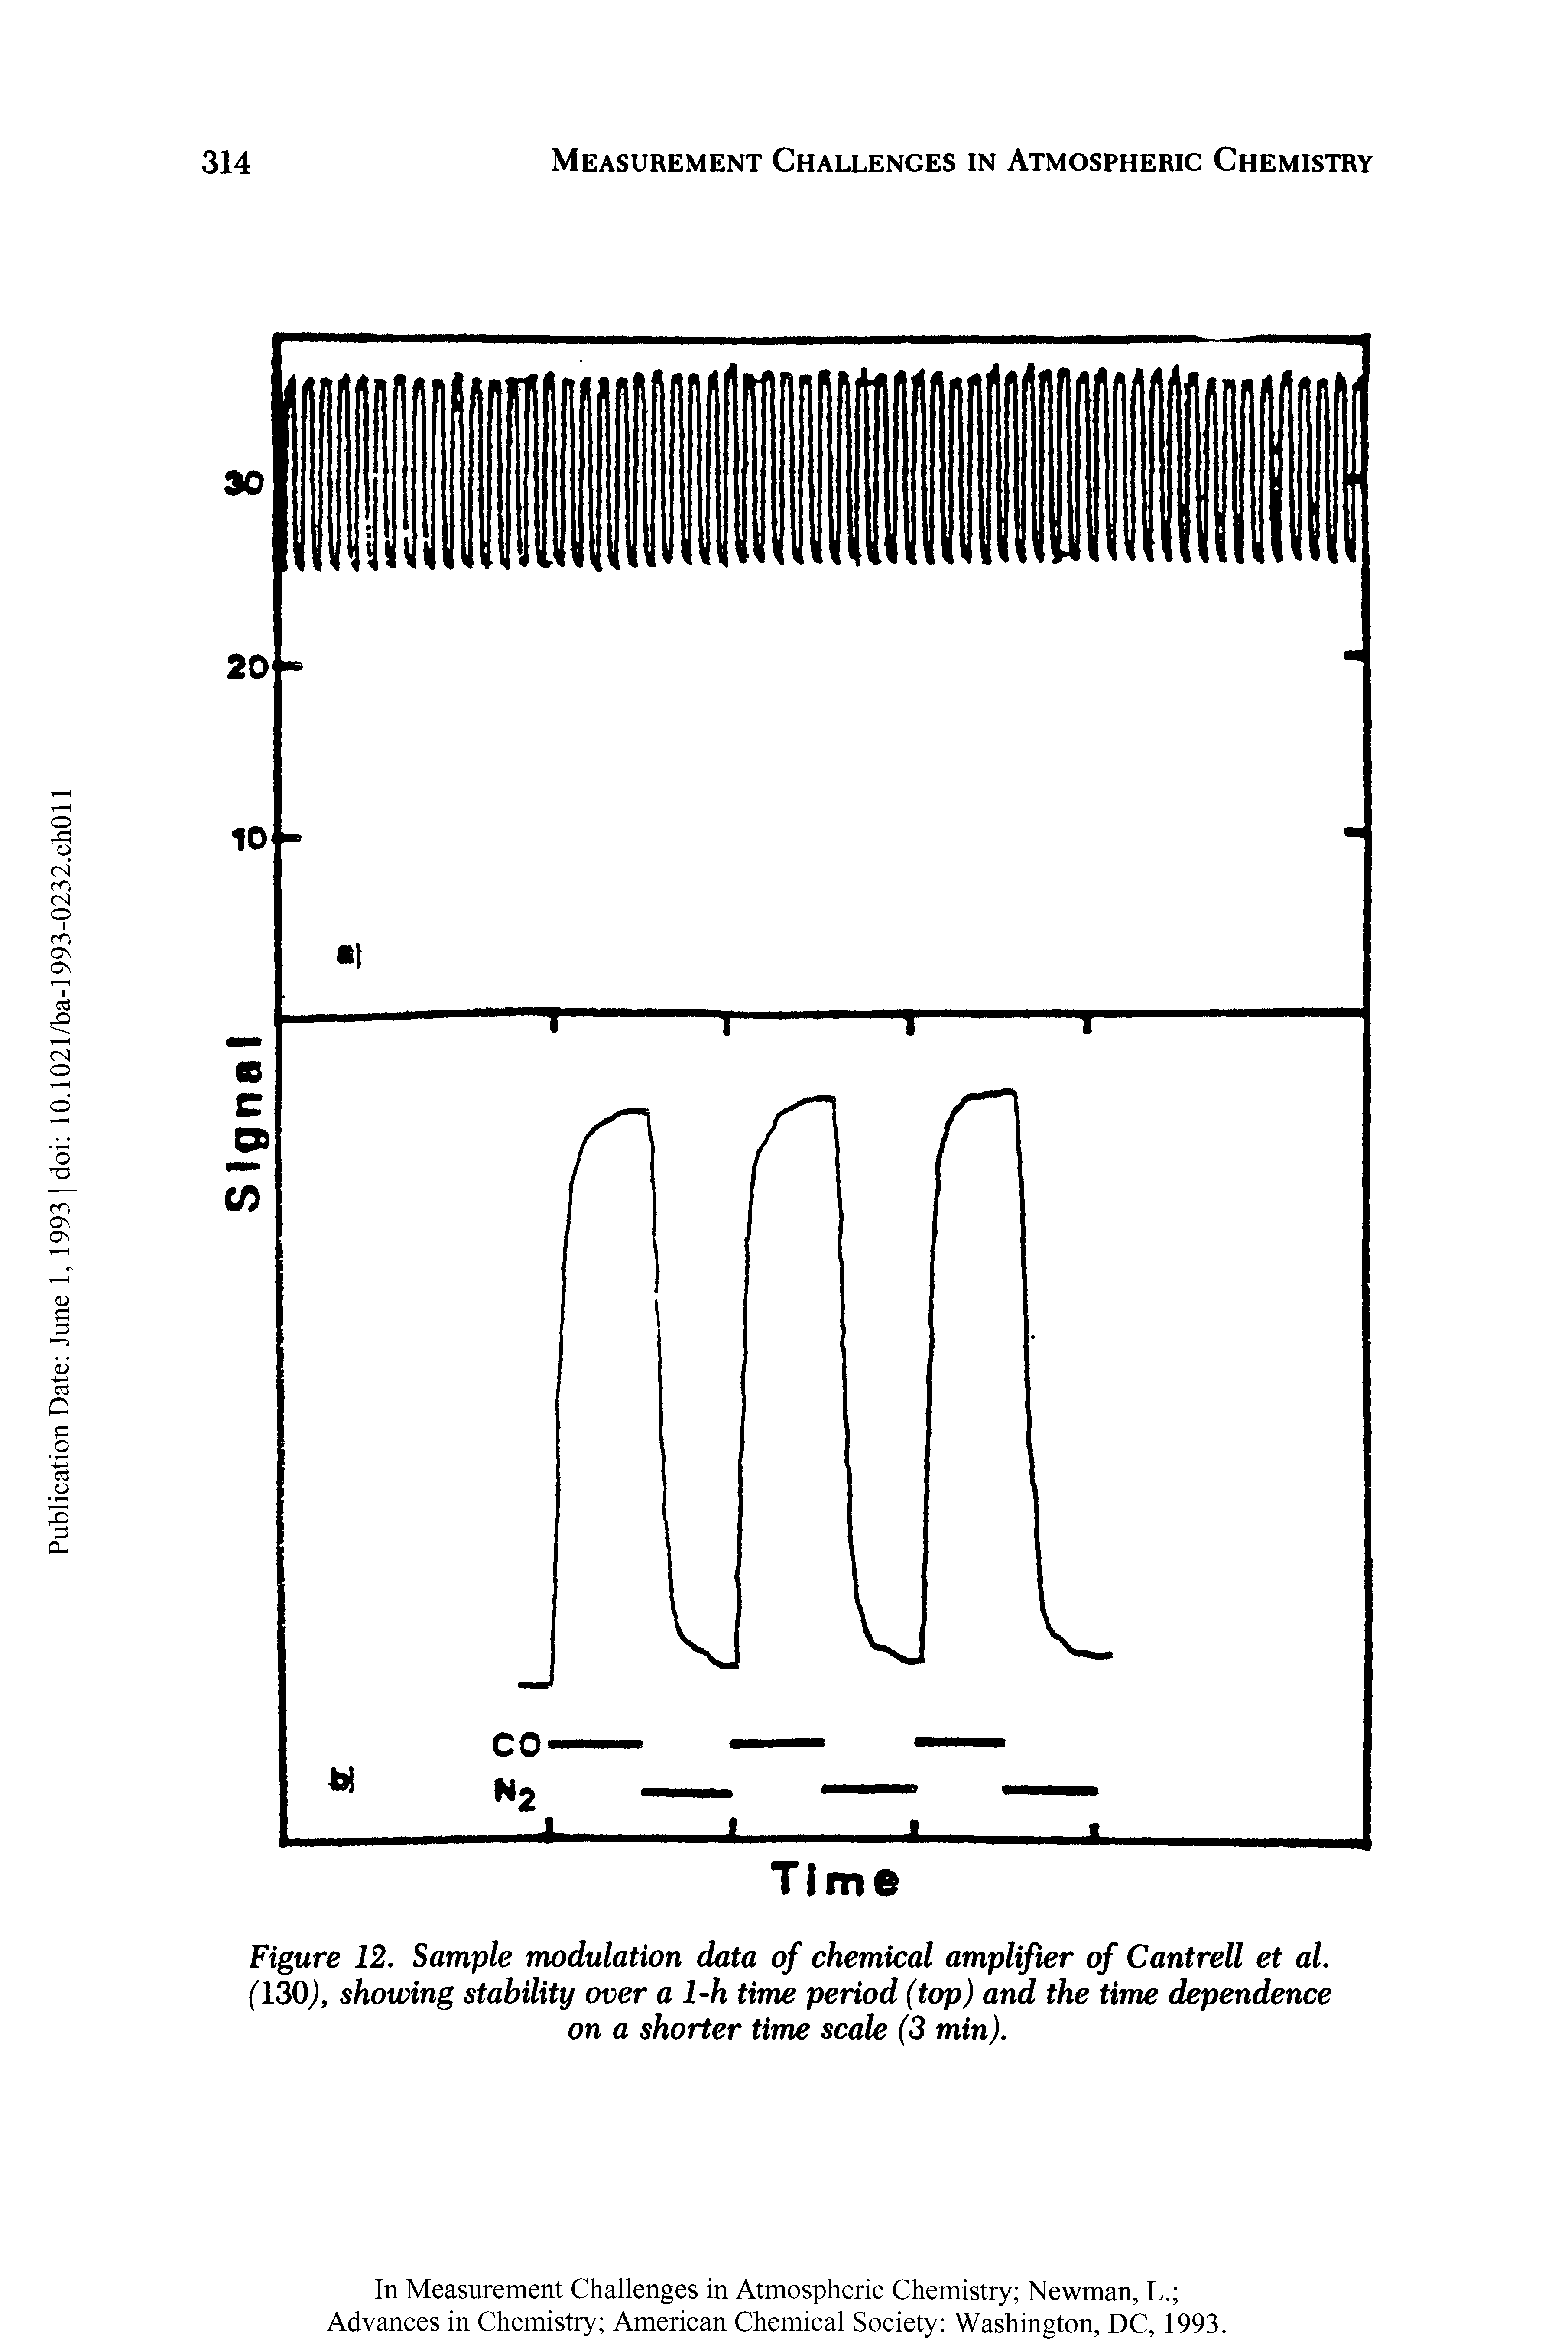 Figure 12. Sample modulation data of chemical amplifier of Cantrell et al. (130,), showing stability over a 1-h time period (top) and the time dependence on a shorter time scale (3 min).